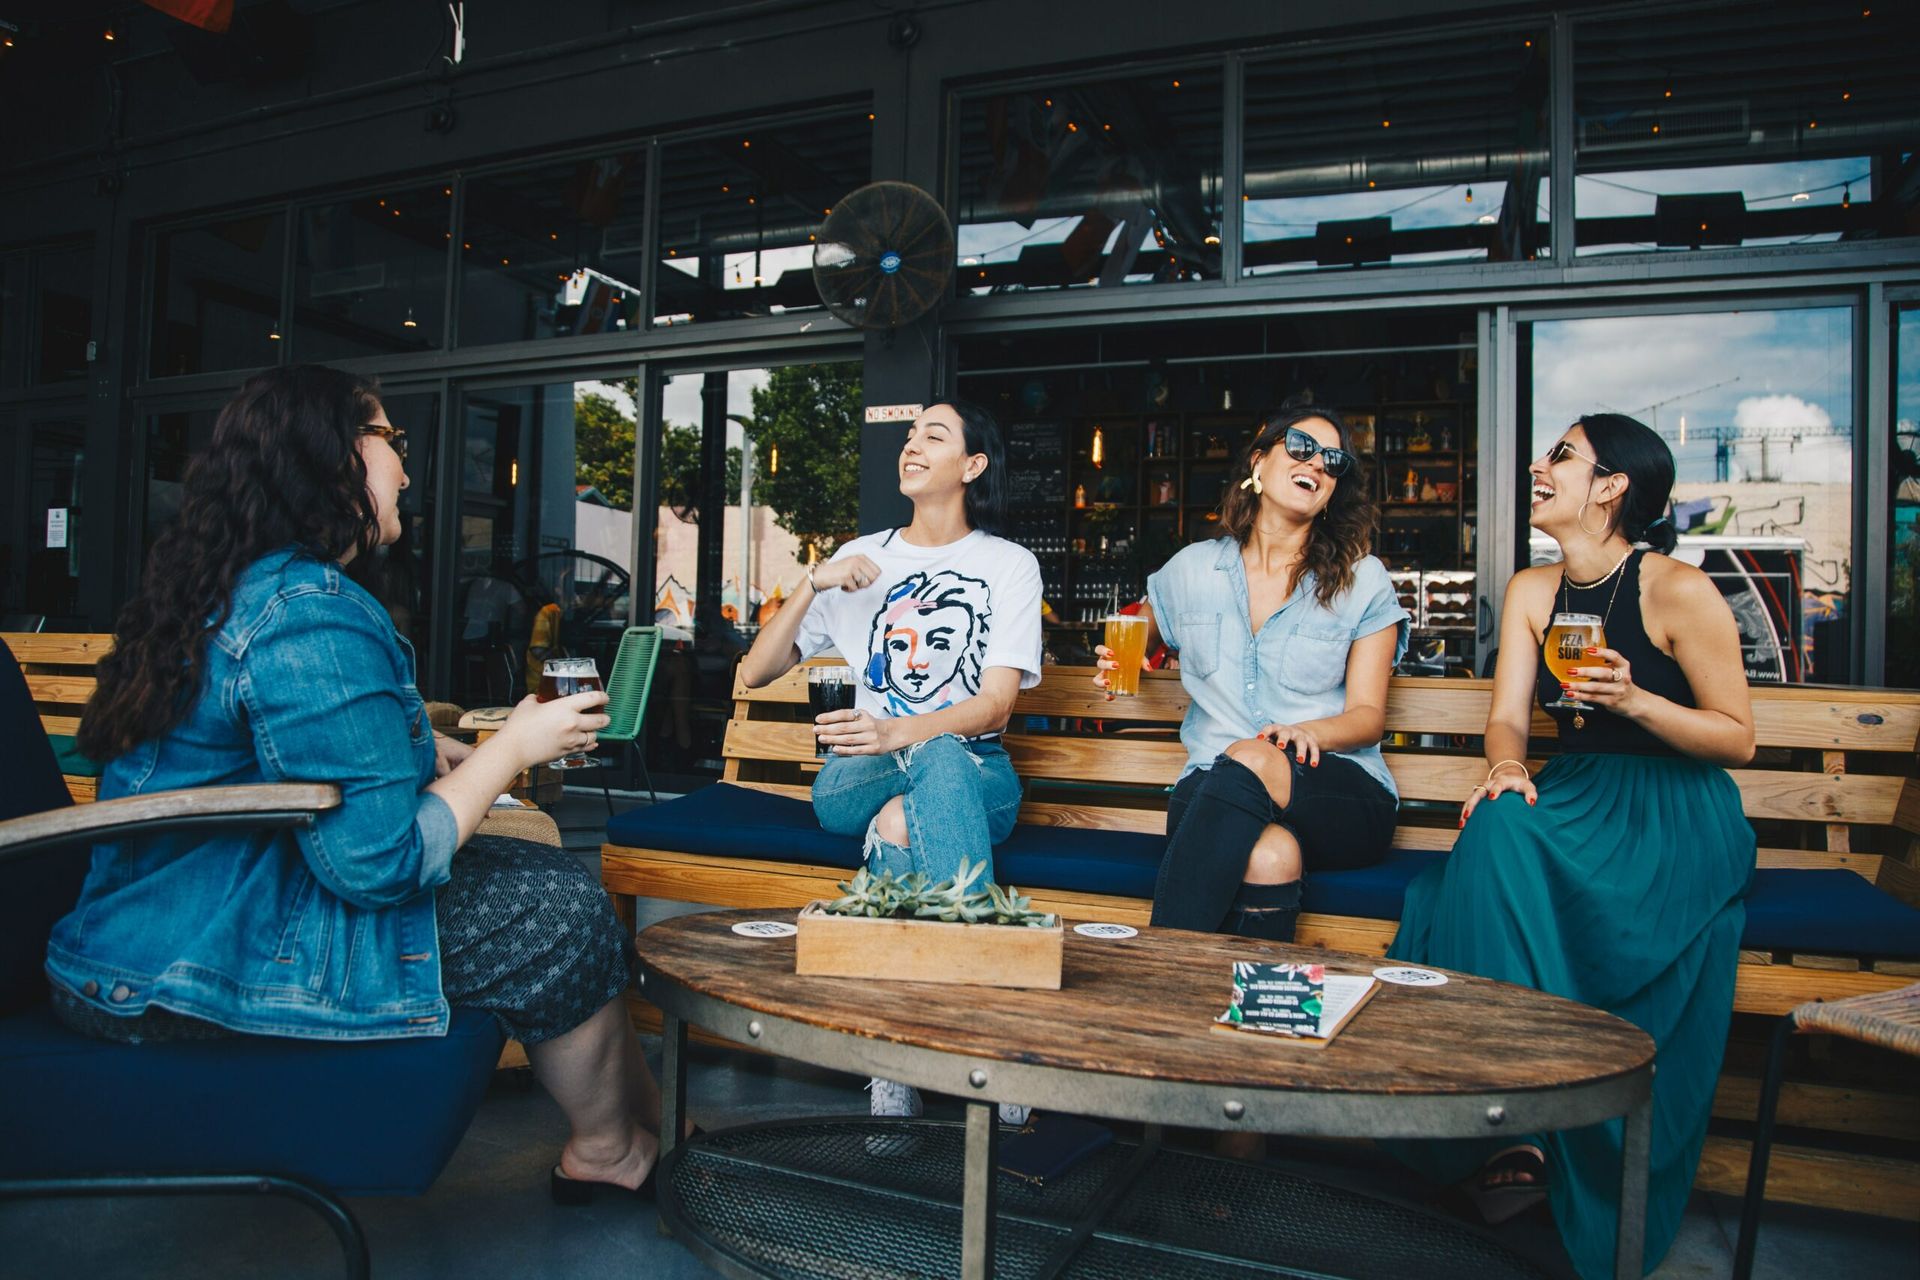 Four young ladies drink beer and laugh.